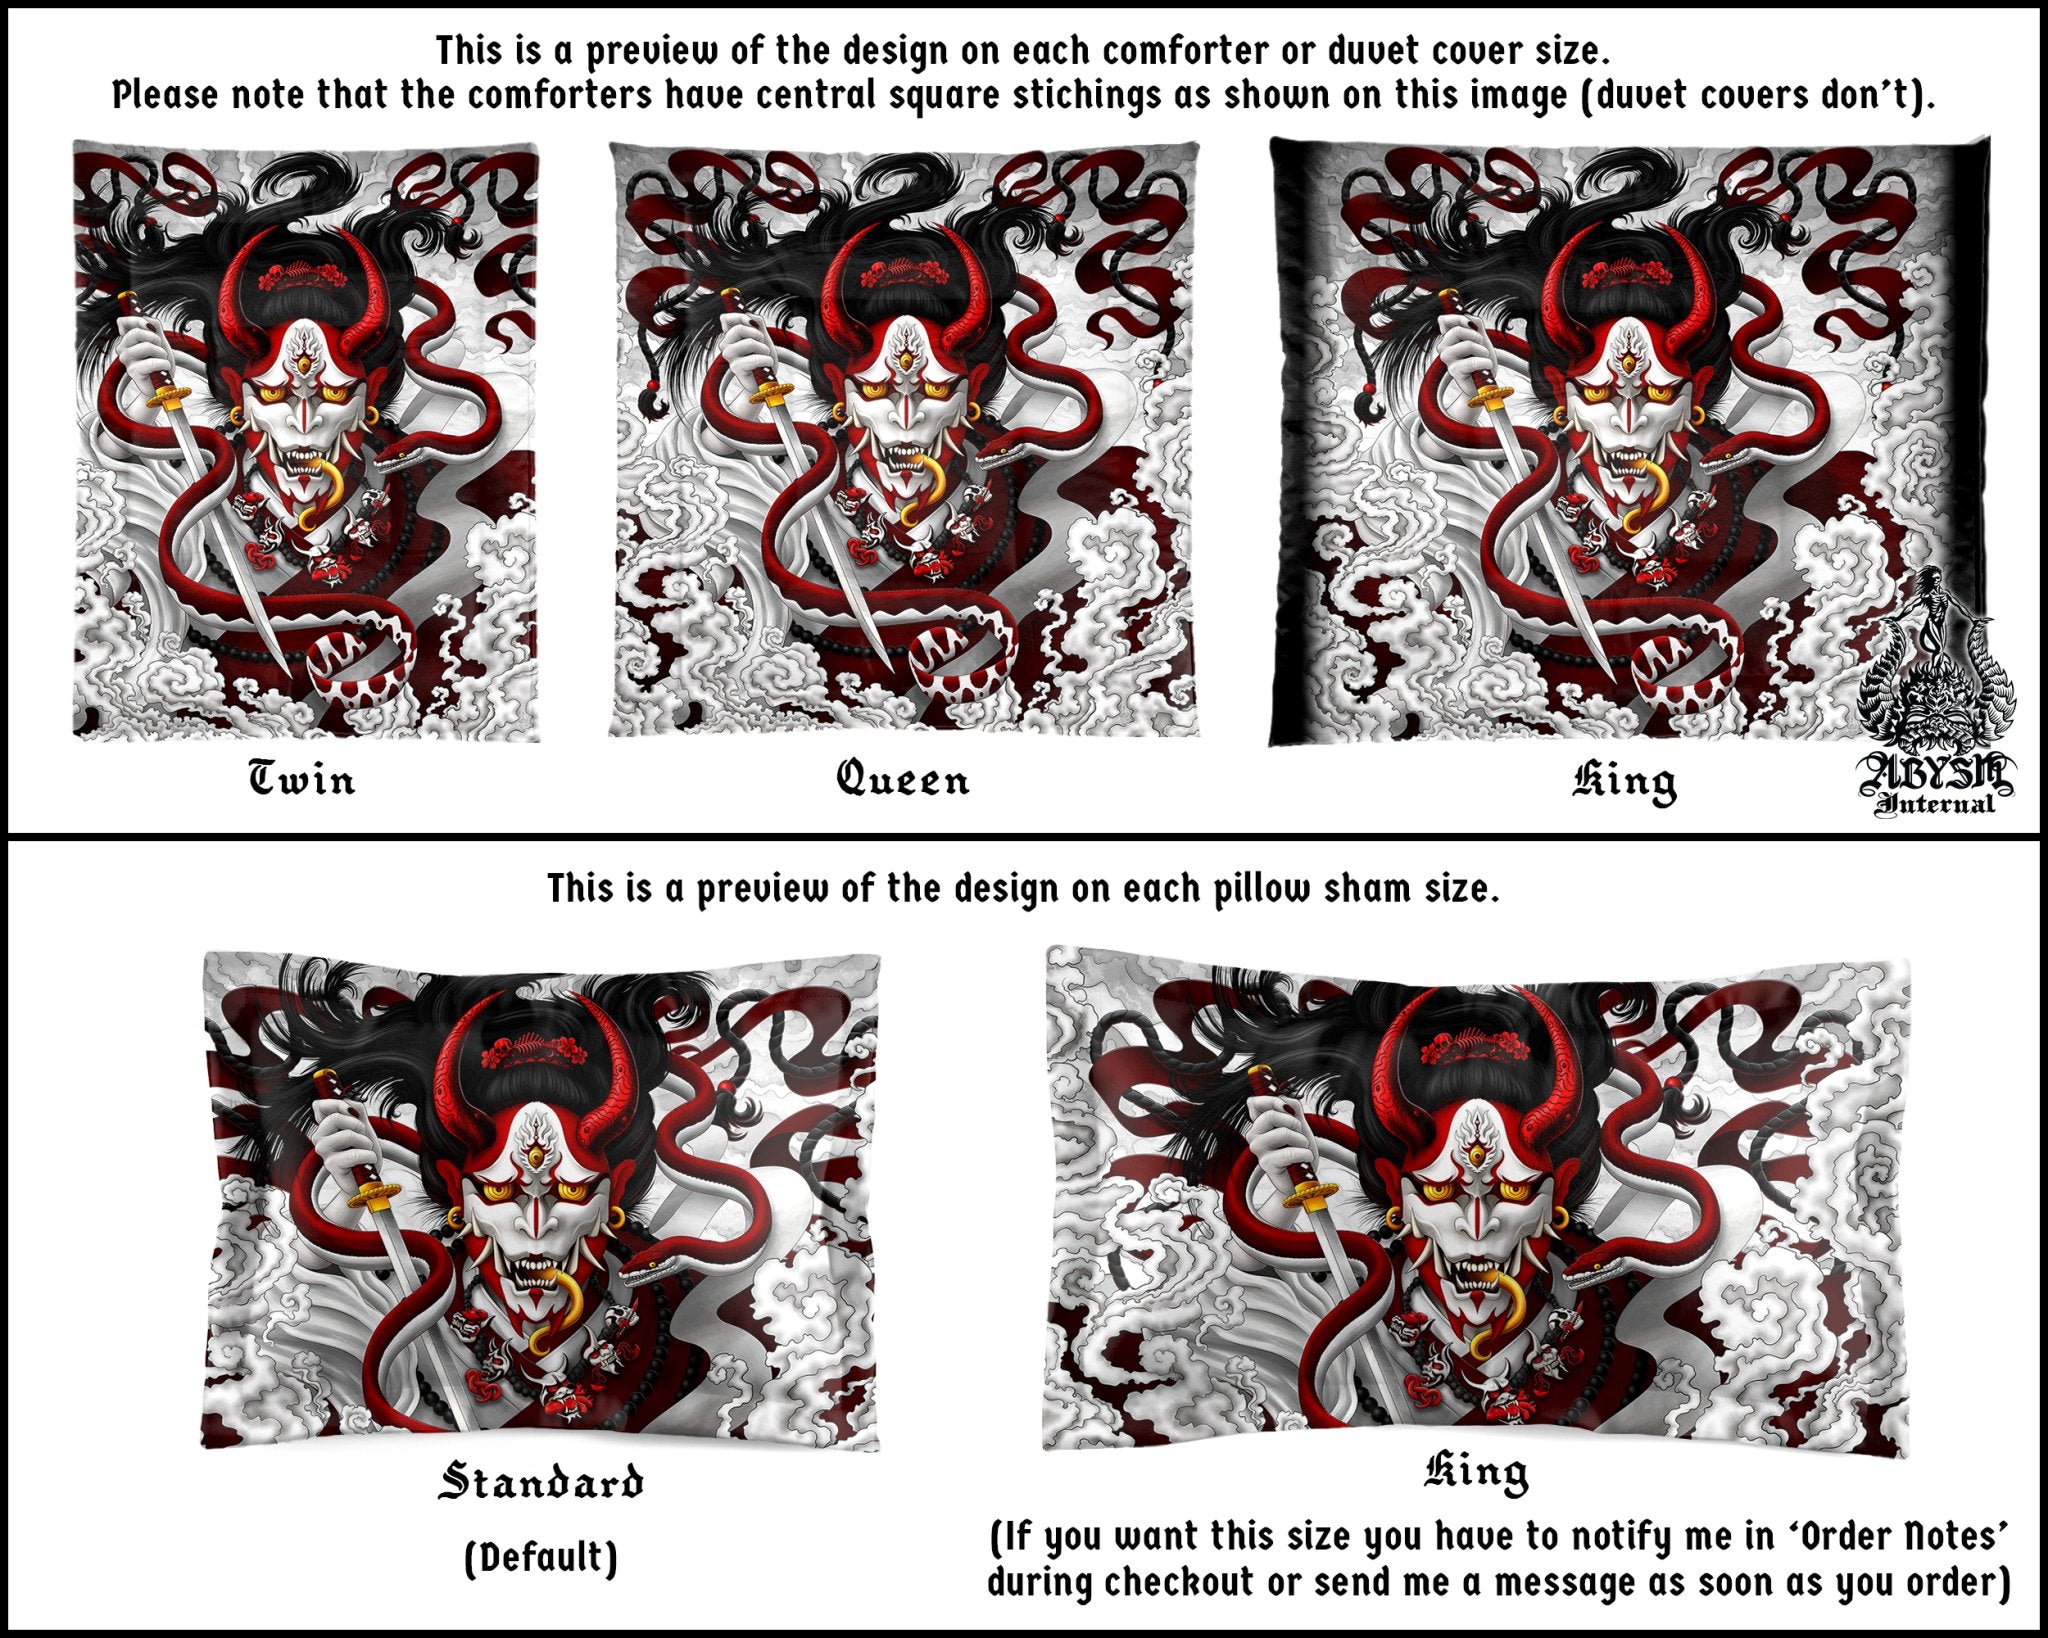 Hannya Bedding Set, Comforter or Duvet, Anime Bed Cover, Bloody White Goth Bedroom Decor, King, Queen & Twin Size - Red Snake and Japanese Demon - Abysm Internal